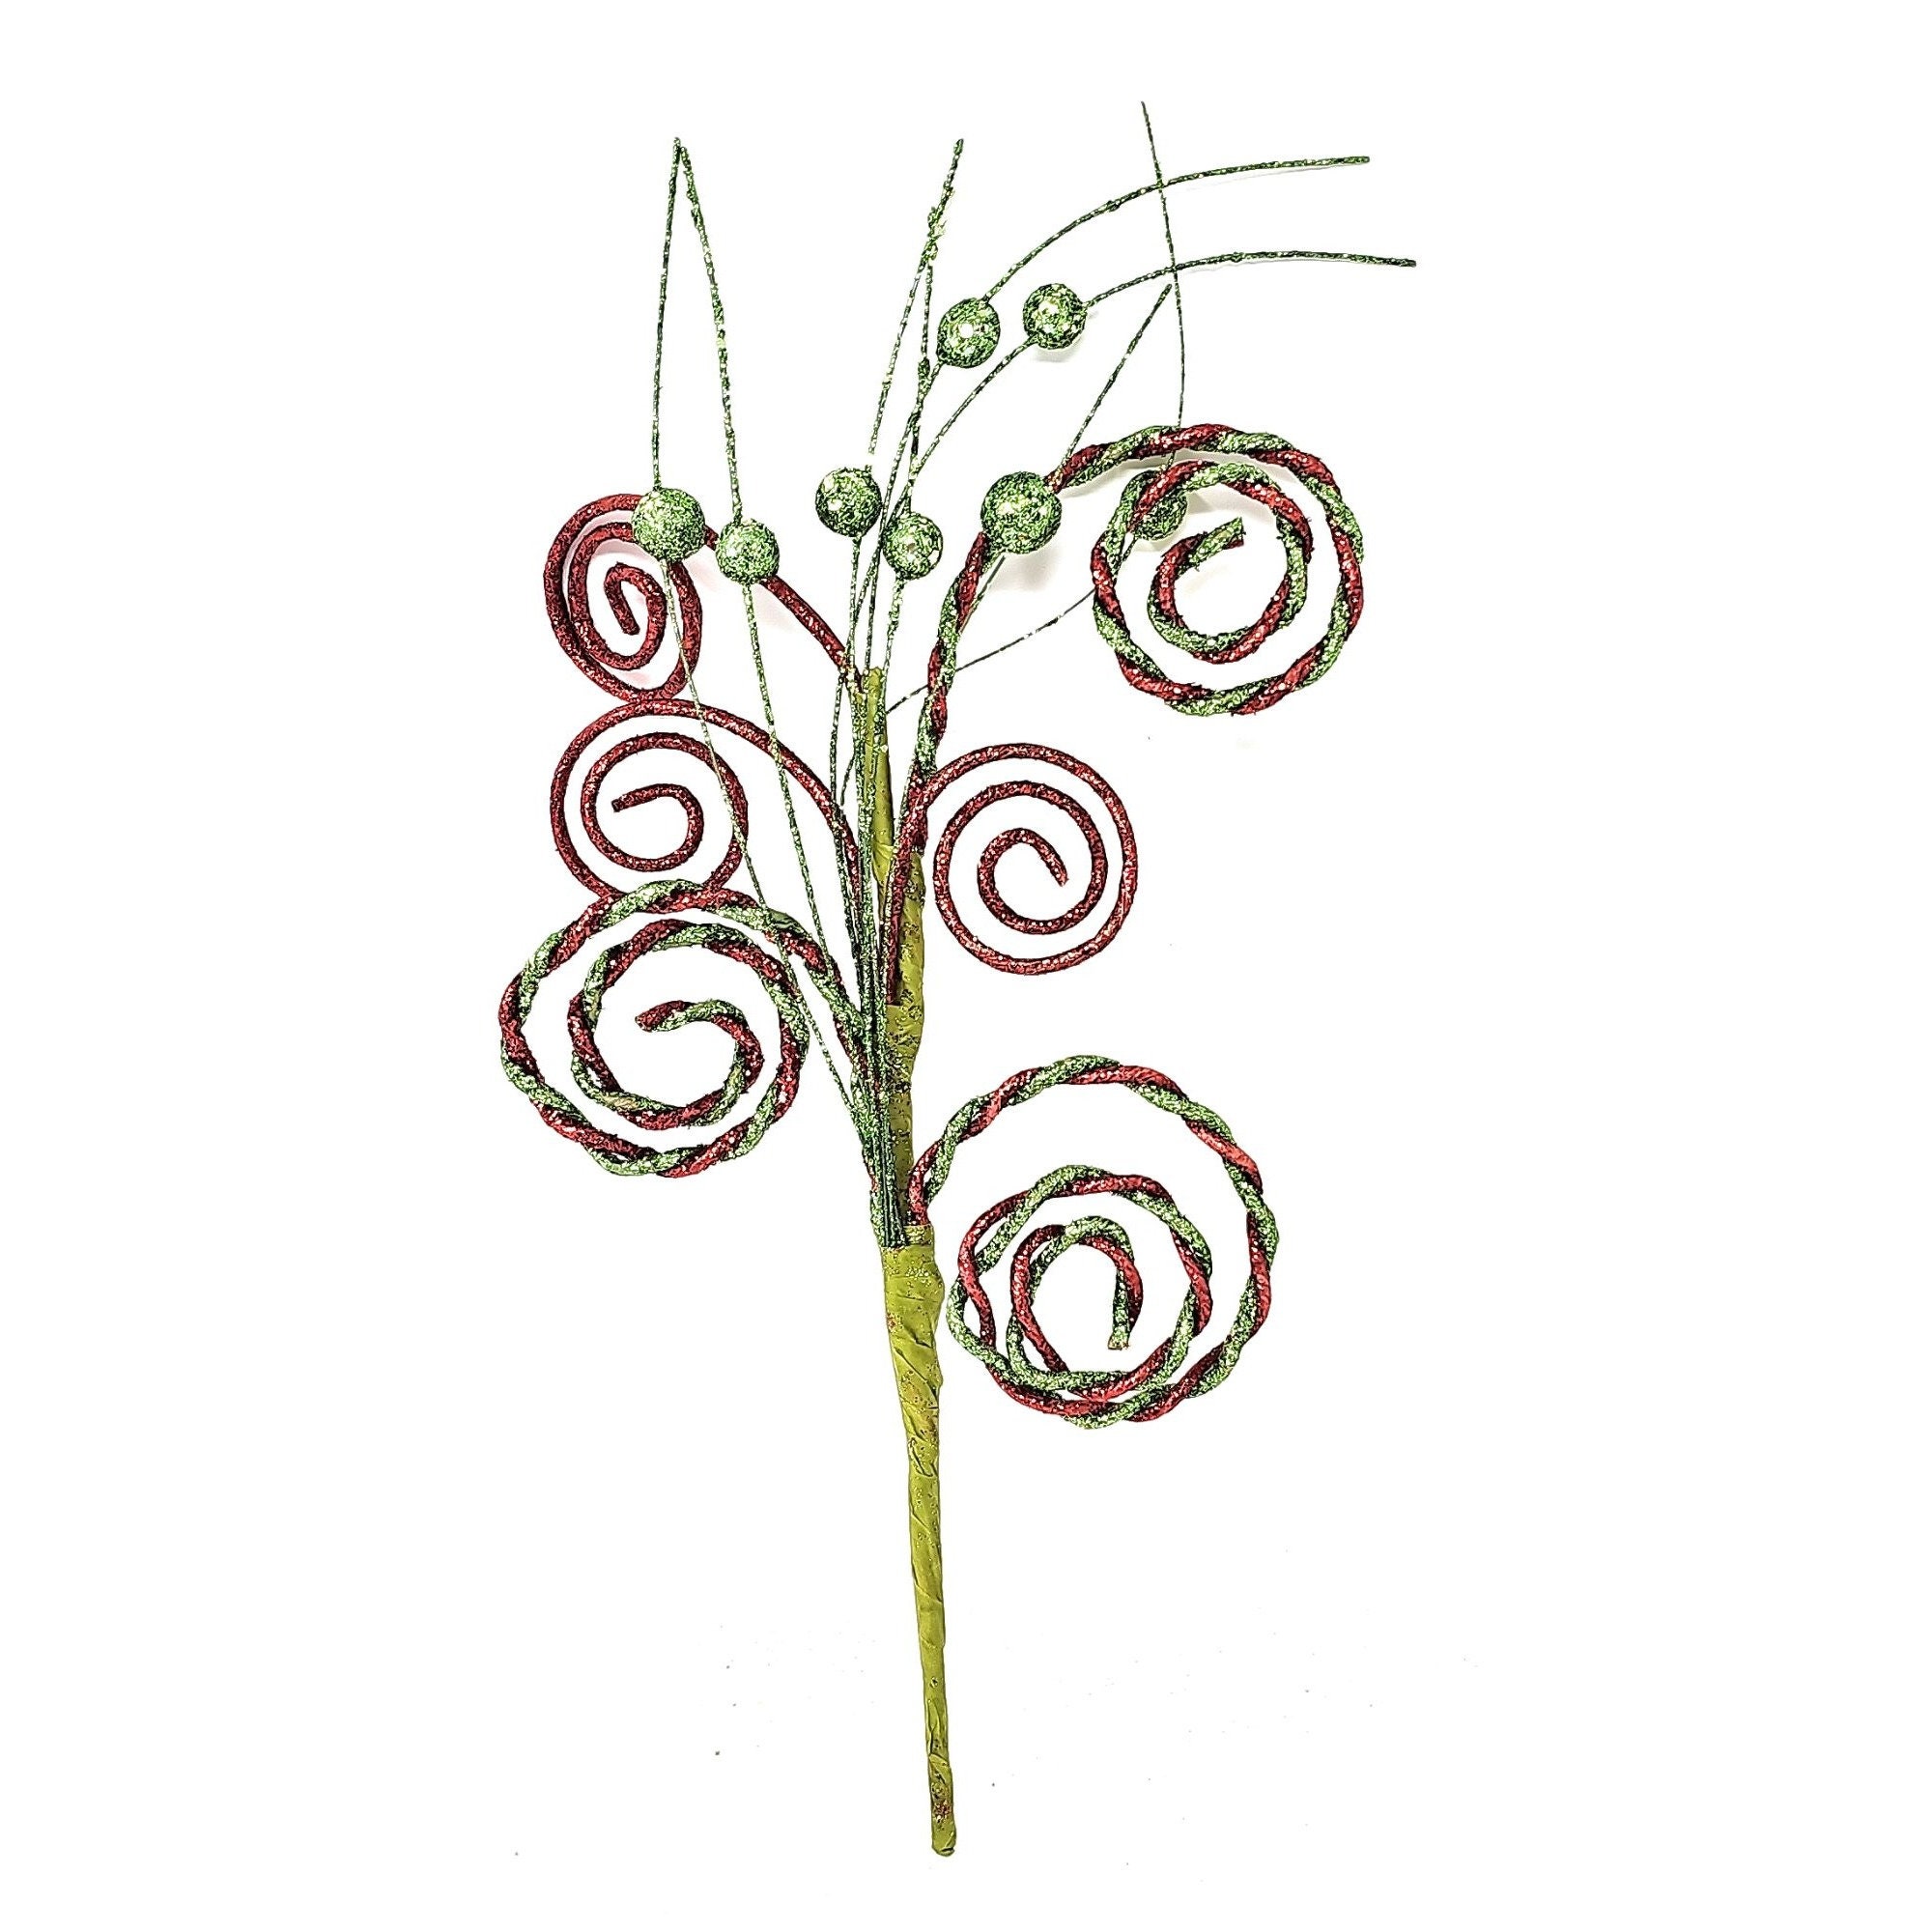 Twisted Twirl Red and Green Glitter Picks Tinsel Ball Floral Stems, Se –  Tesadorz